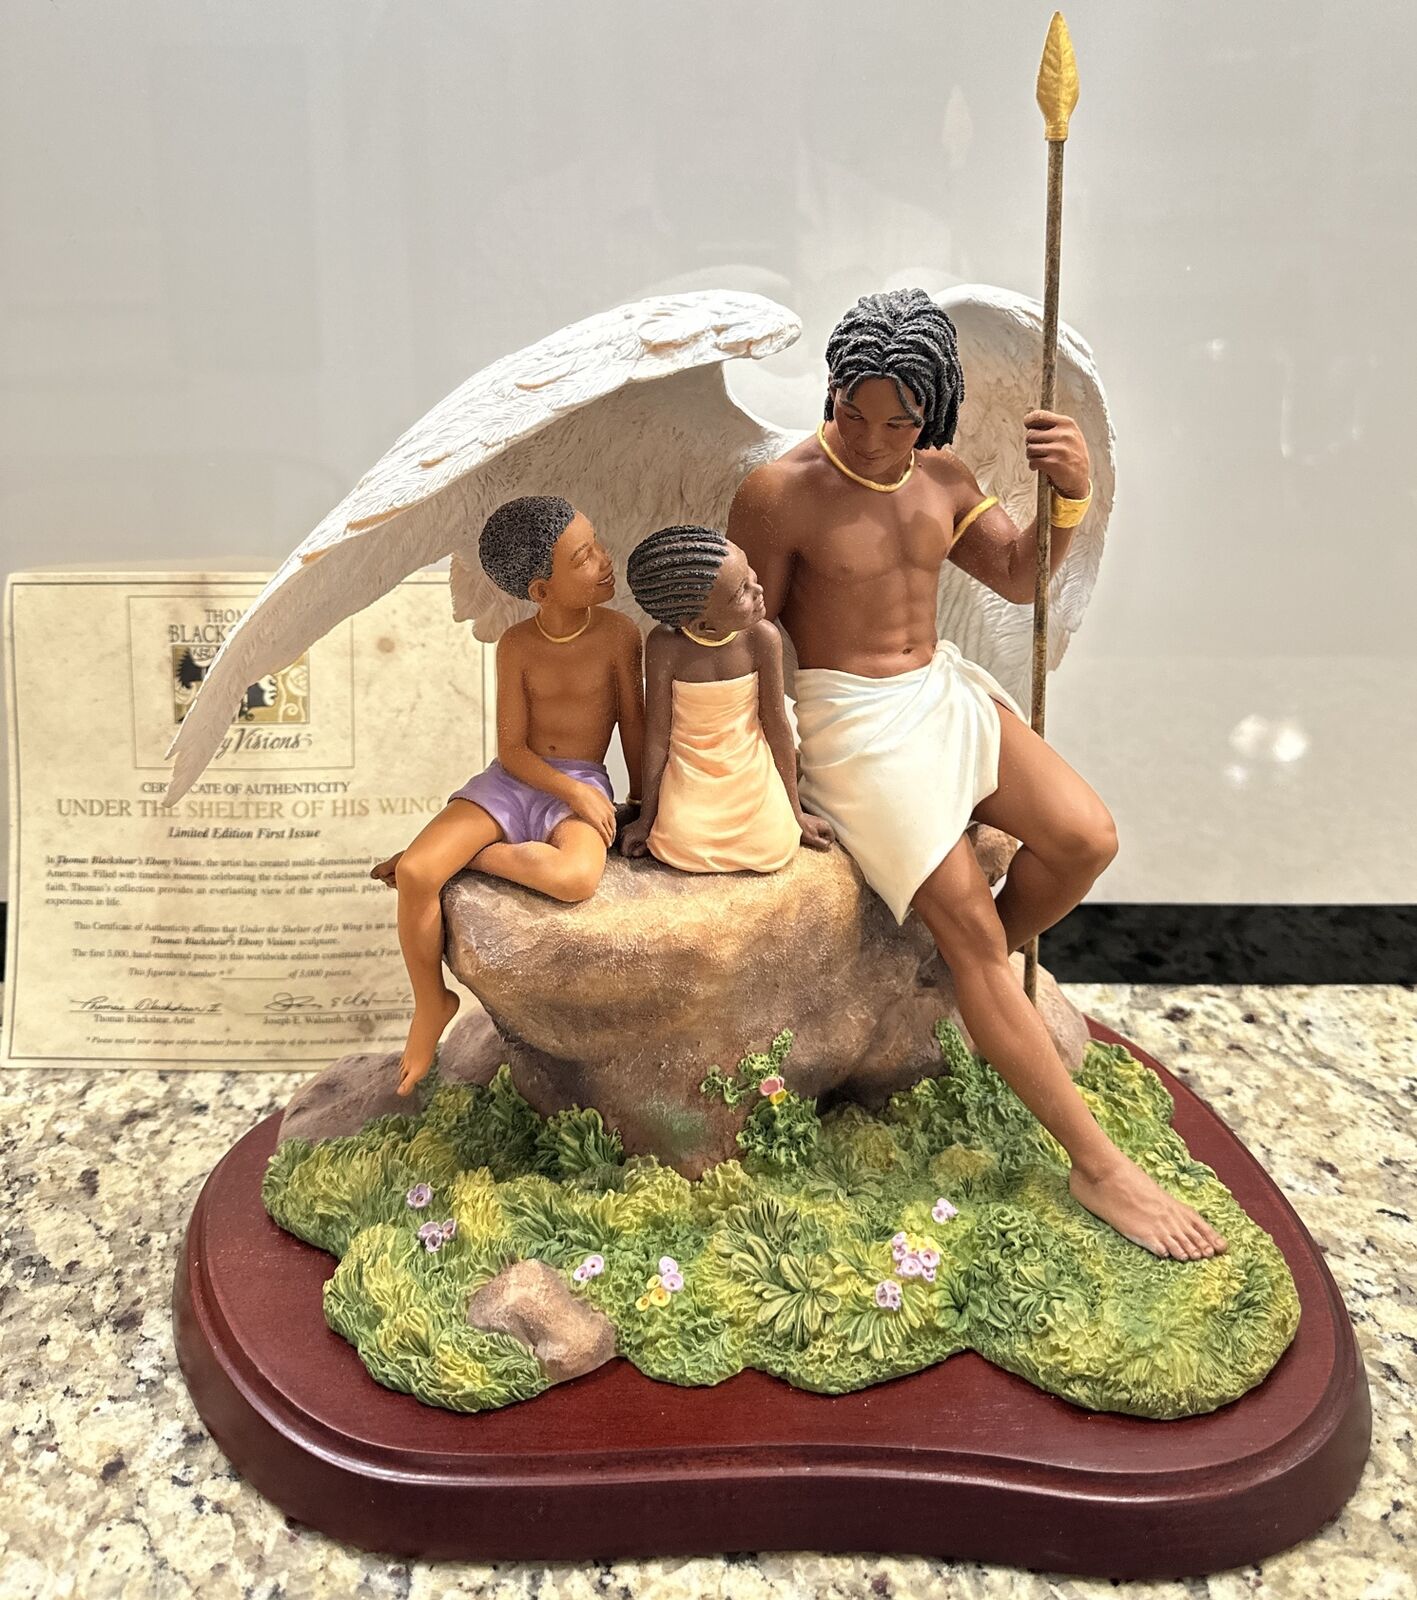 THOMAS BLACKSHEAR’S Ebony Visions UNDER THE SHELTER OF HIS WING Figurine LE 1st